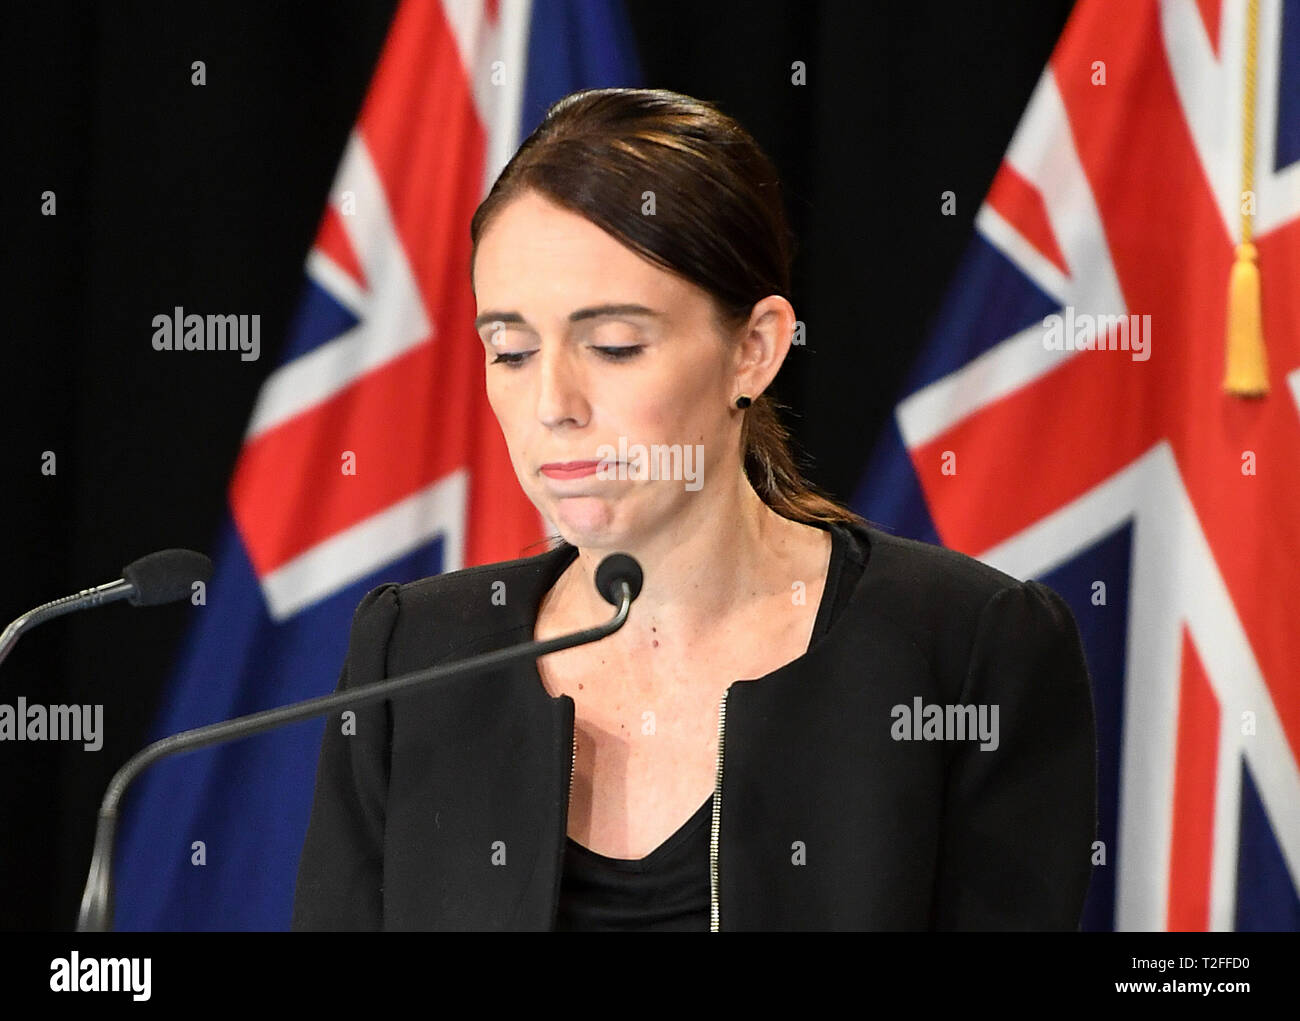 Beijing, New Zealand. 16th Mar, 2019. New Zealand Prime Minister Jacinda Ardern reacts during a briefing in Wellington, capital of New Zealand, on March 16, 2019. Jacinda Ardern reiterated to the public Saturday morning that the country's gun law will be changed. Gunmen opened fire in two separate mosques in Christchurch of New Zealand on Friday killing 50 people. Credit: Guo Lei/Xinhua/Alamy Live News Stock Photo